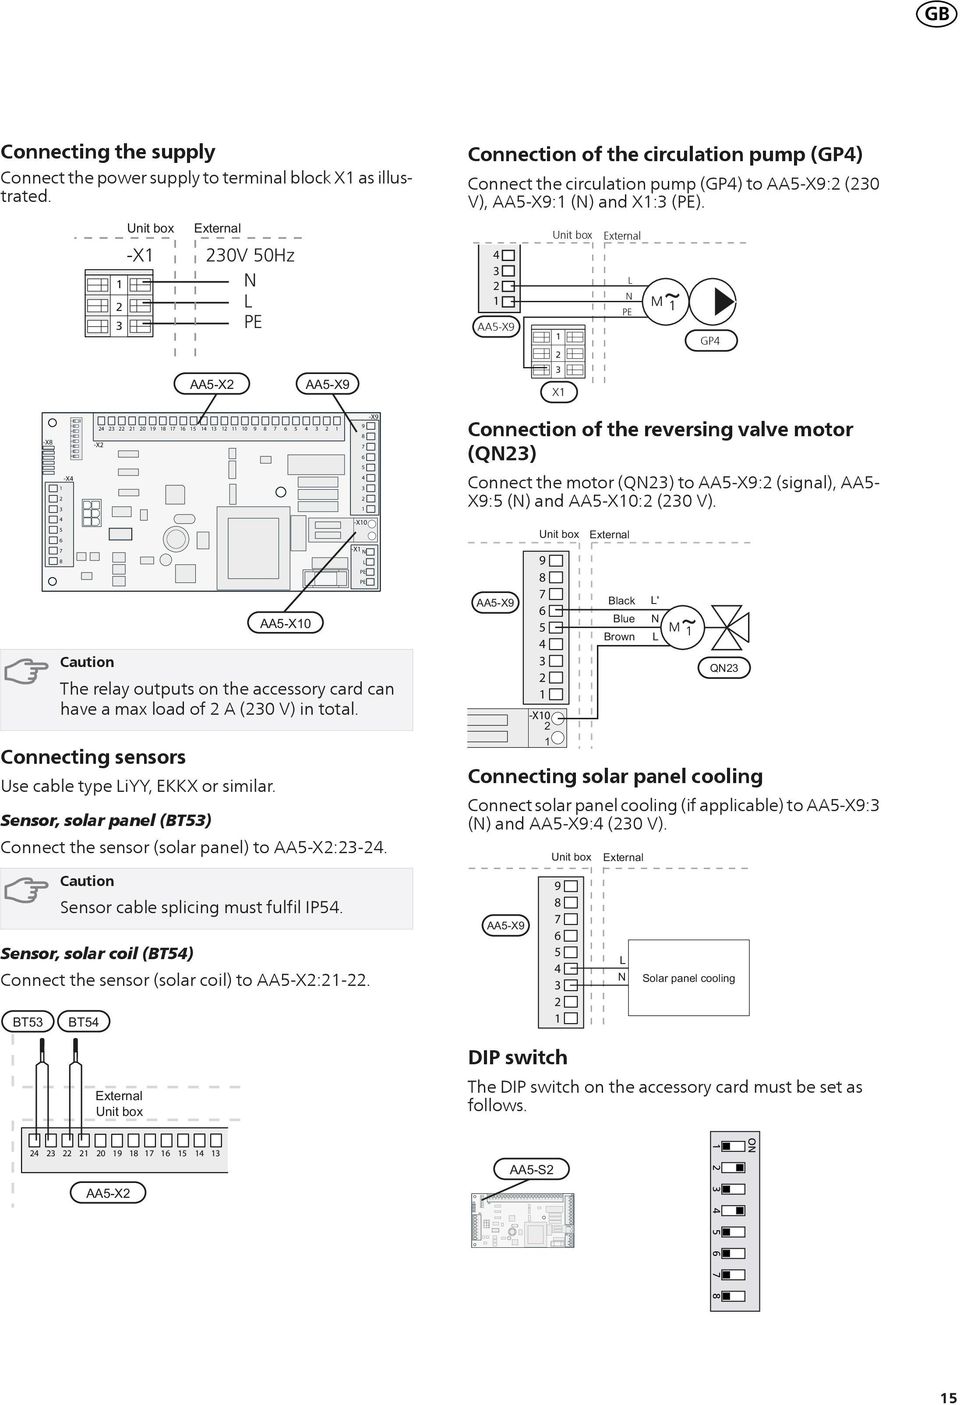 -X Unit box X External GP -X -X 0 0 -X Caution The relay outputs on the accessory card can have a max load of (0 V) in total. Connecting sensors Use cable type iyy, EKKX or similar.